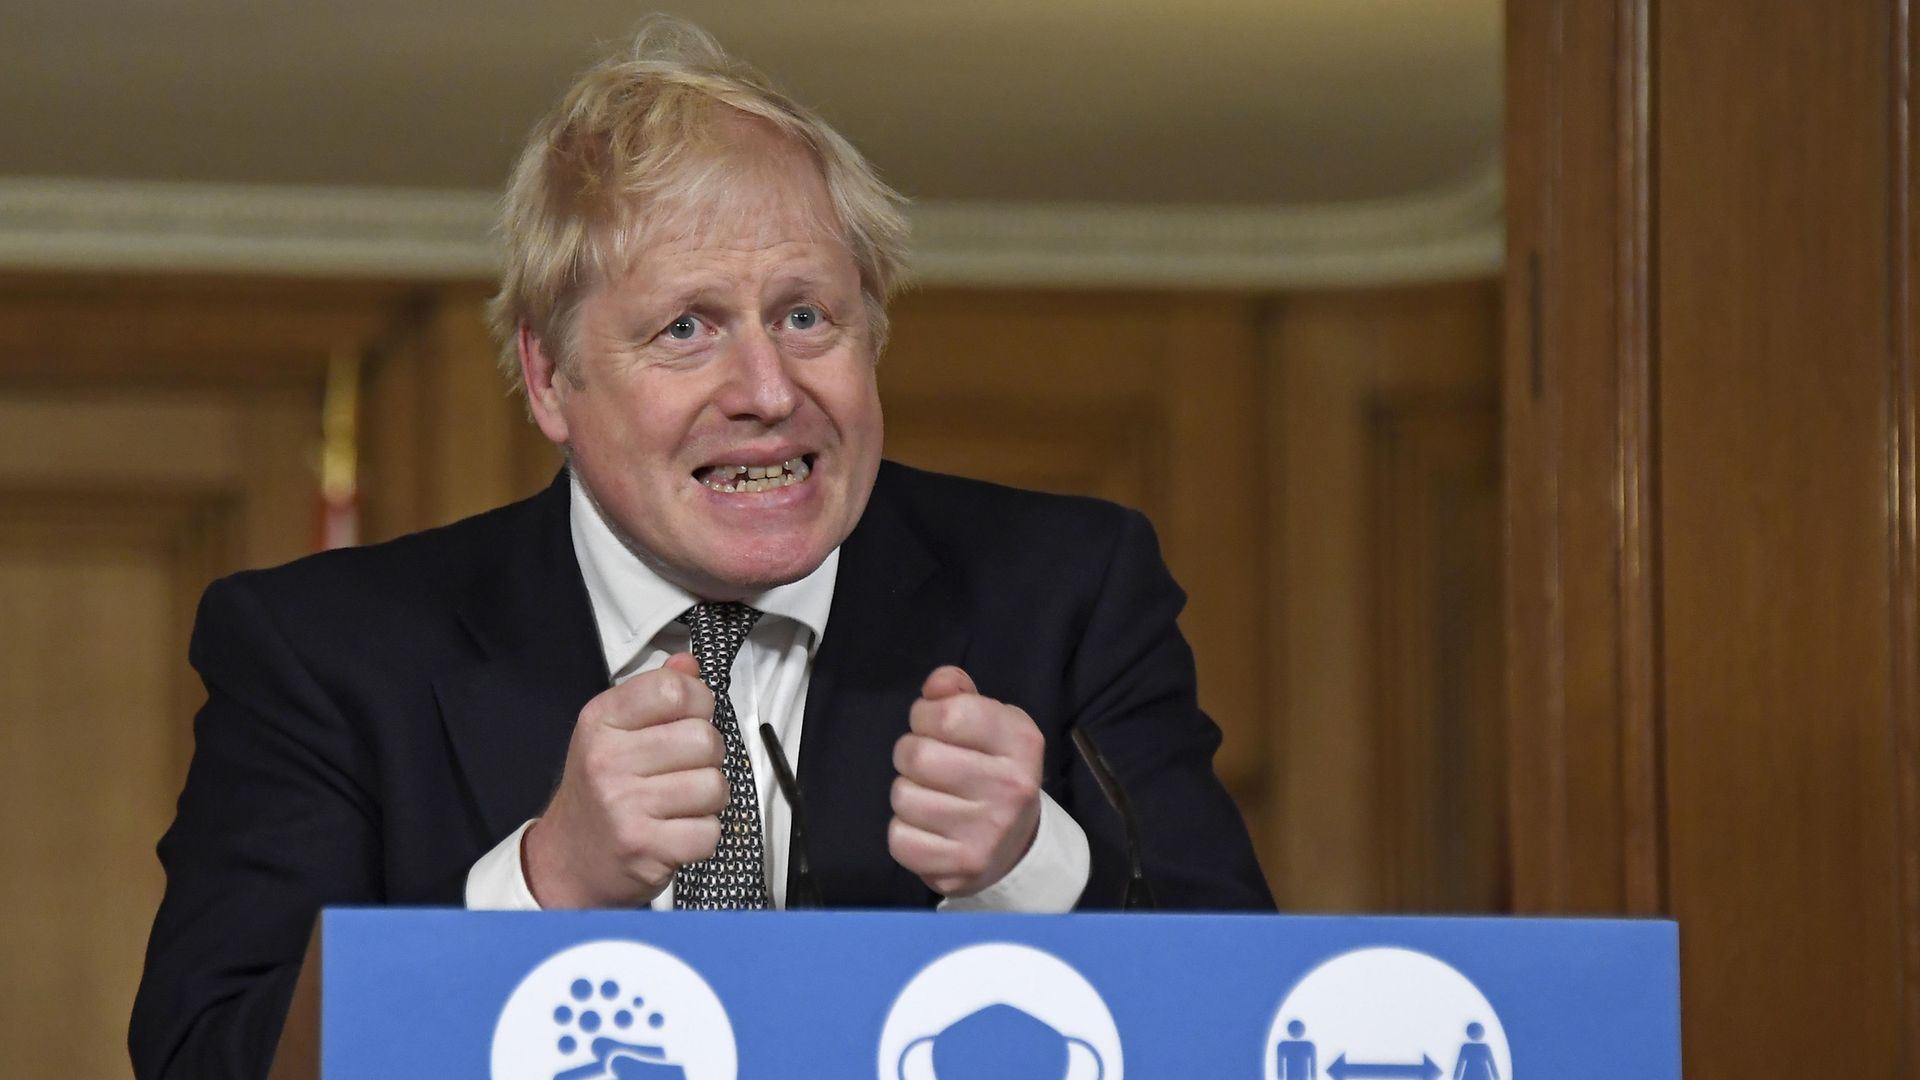 Prime Minister Boris Johnson during a media briefing in Downing Street, London, on coronavirus (COVID-19). - Credit: PA